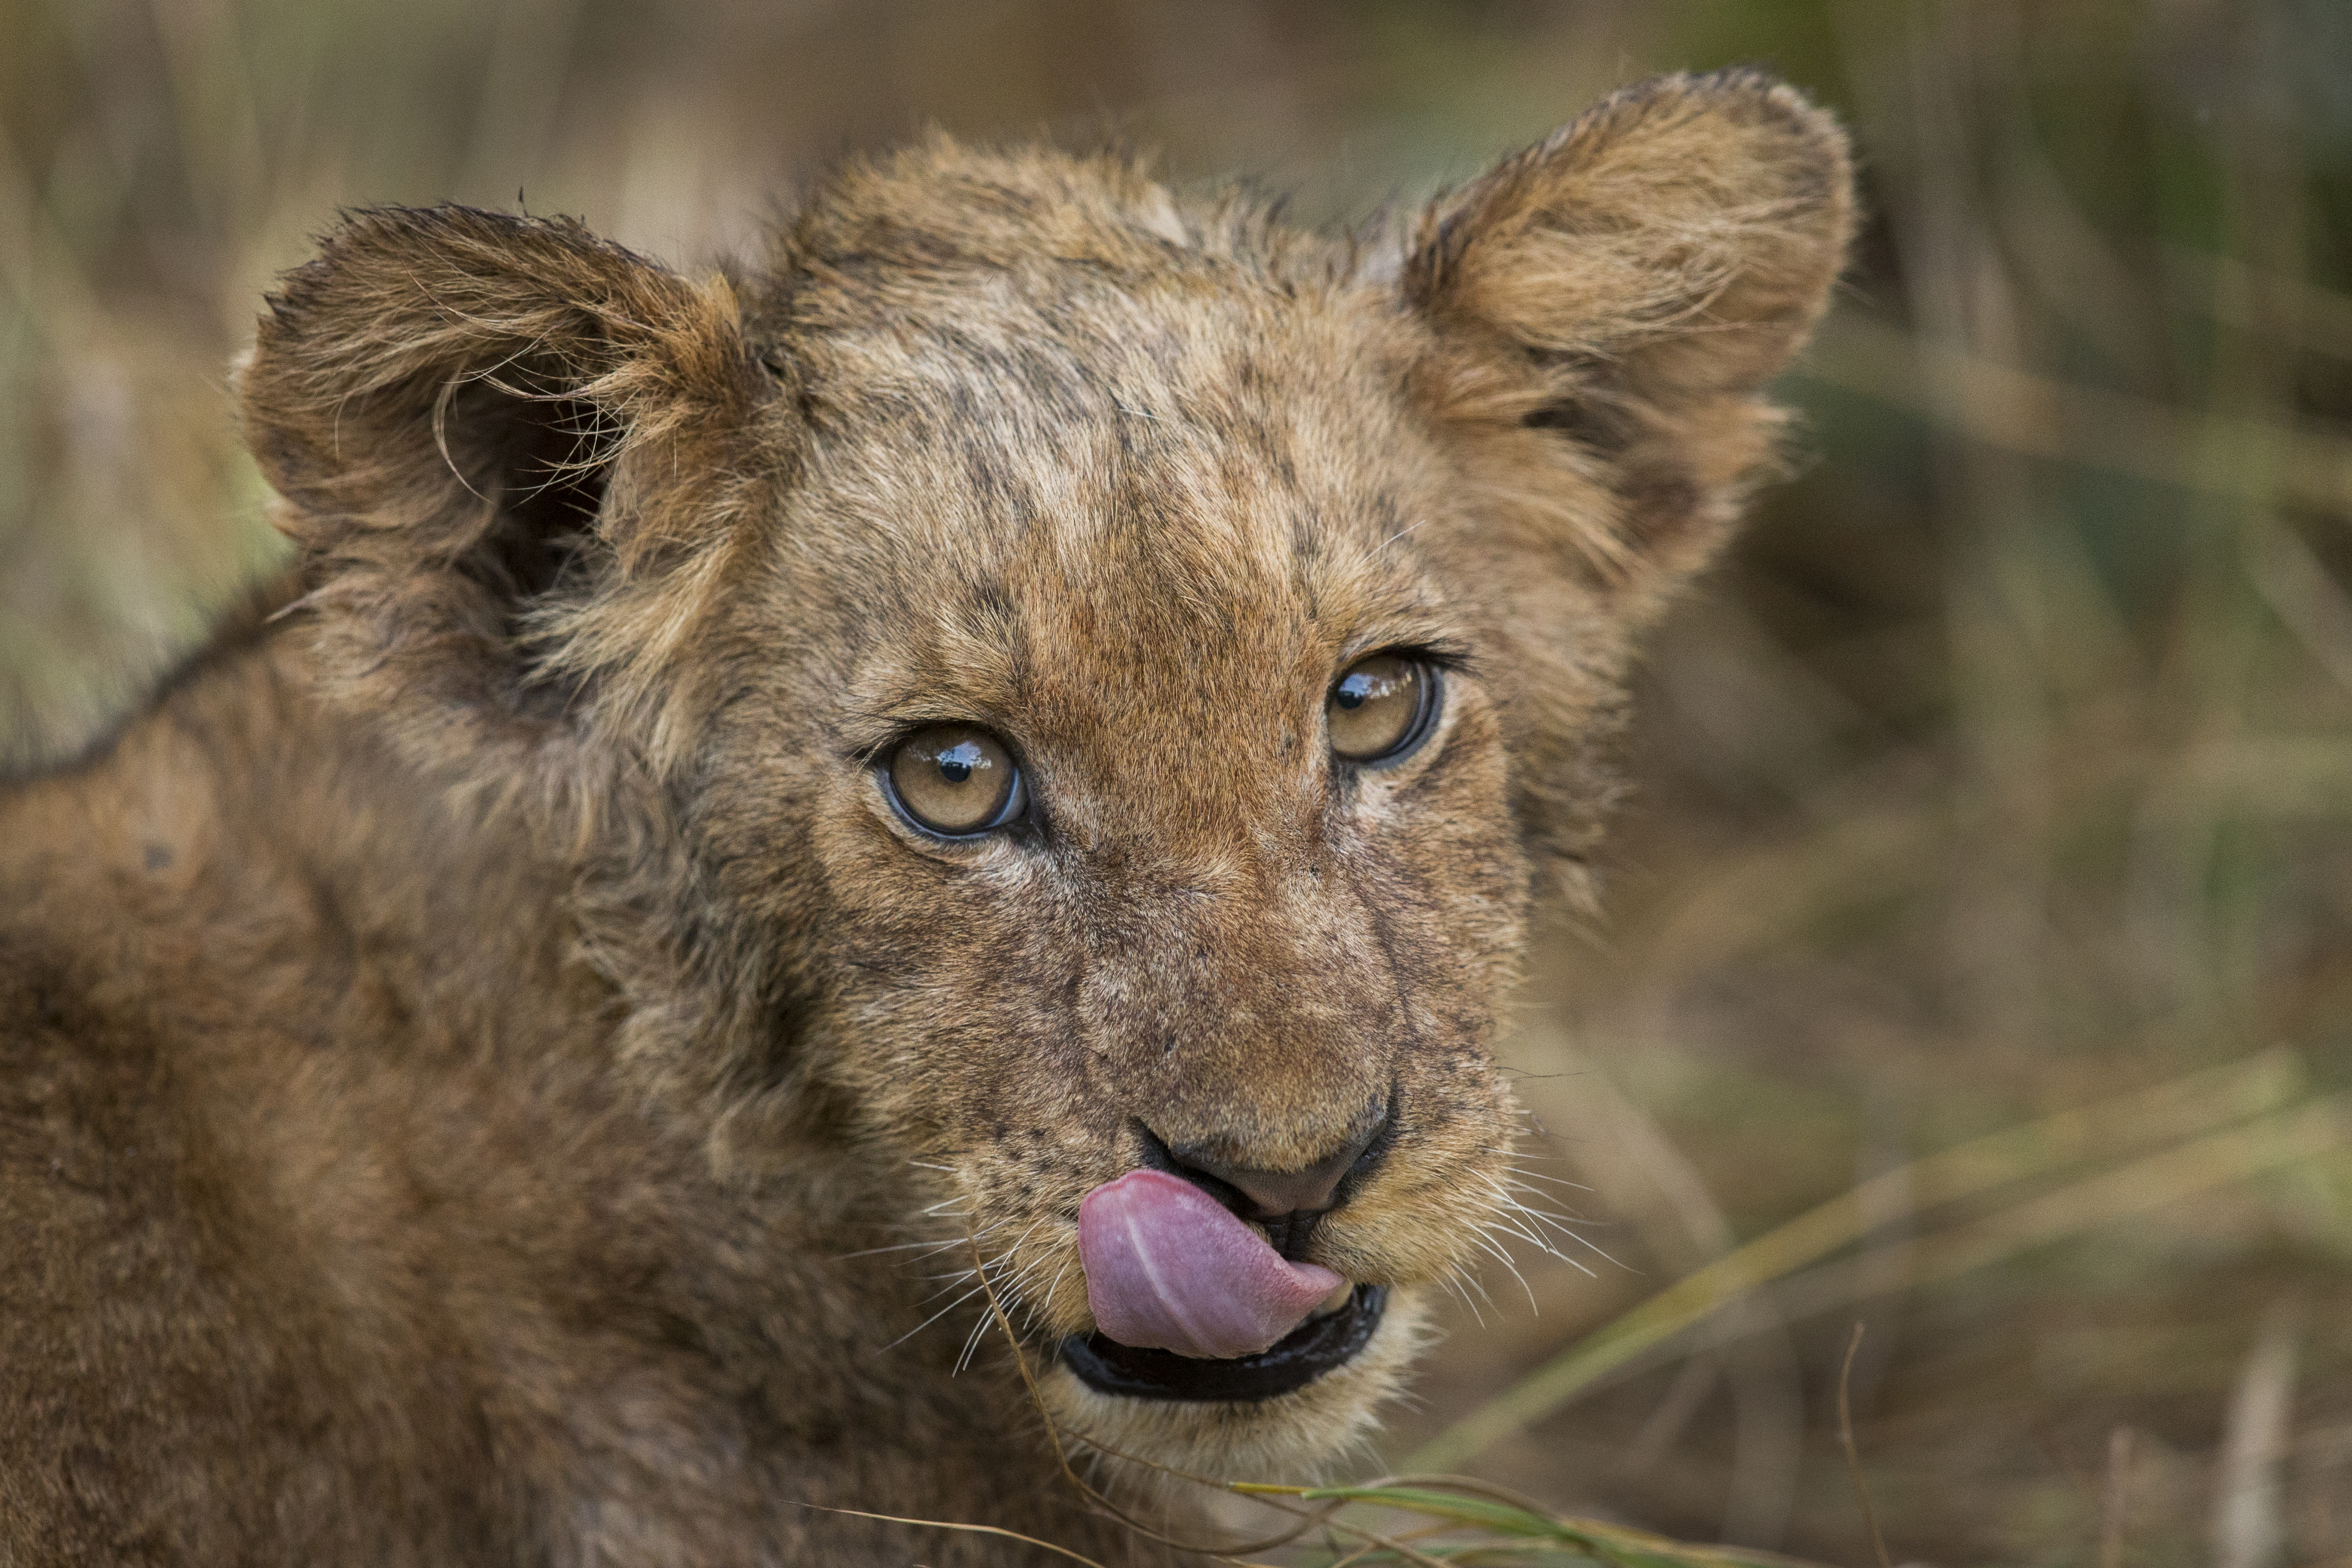 "African Lion cub licking chops, Kafue National Park, Zambia"